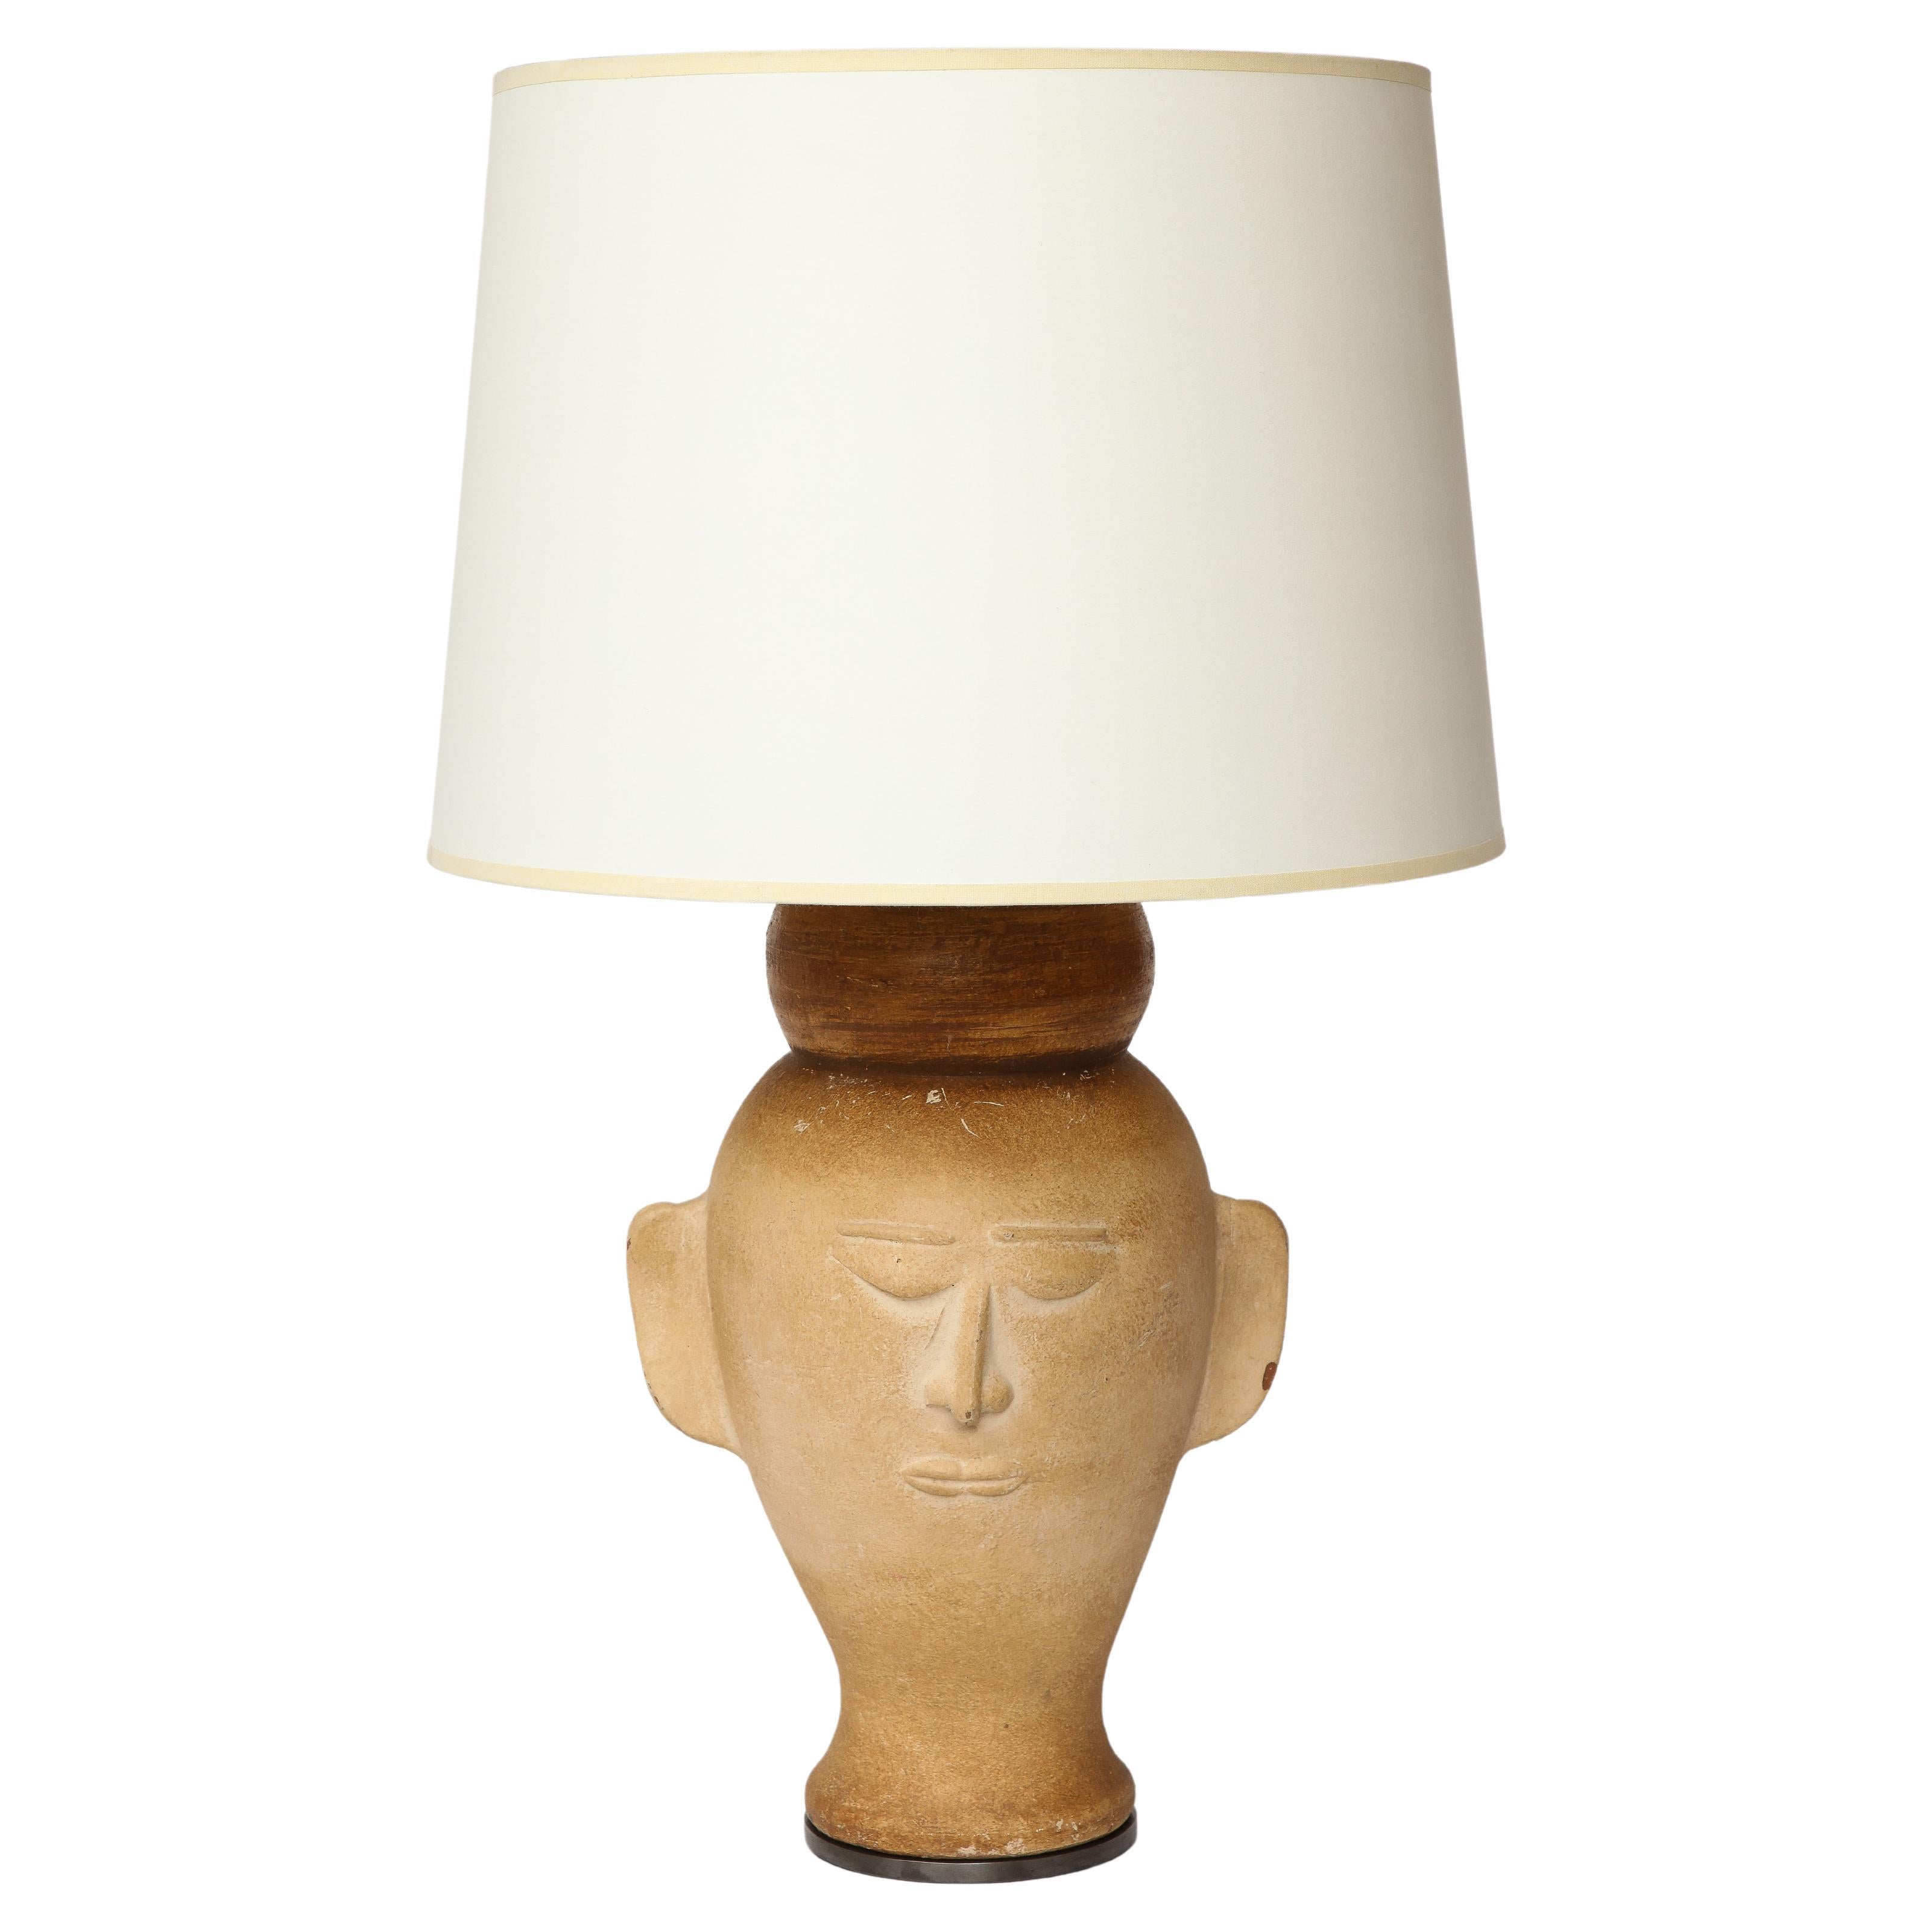 Terracotta Bust Table Lamp with Darkened Metal Base, 20th C.